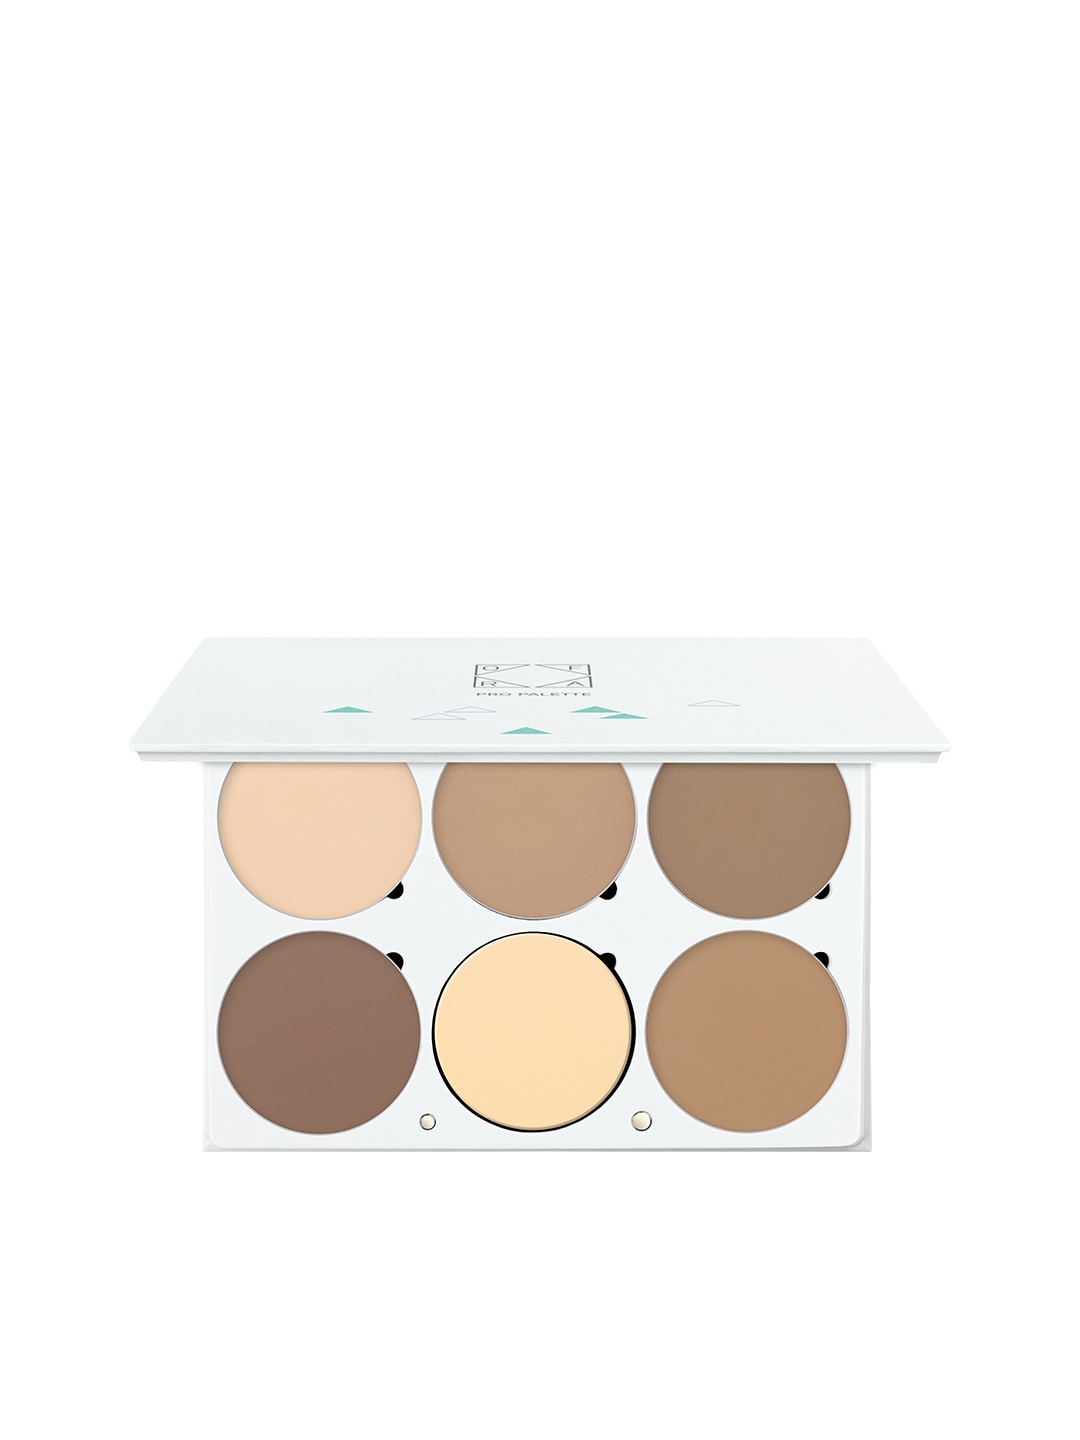 OFRA Professional Foundation Makeup Palette Price in India